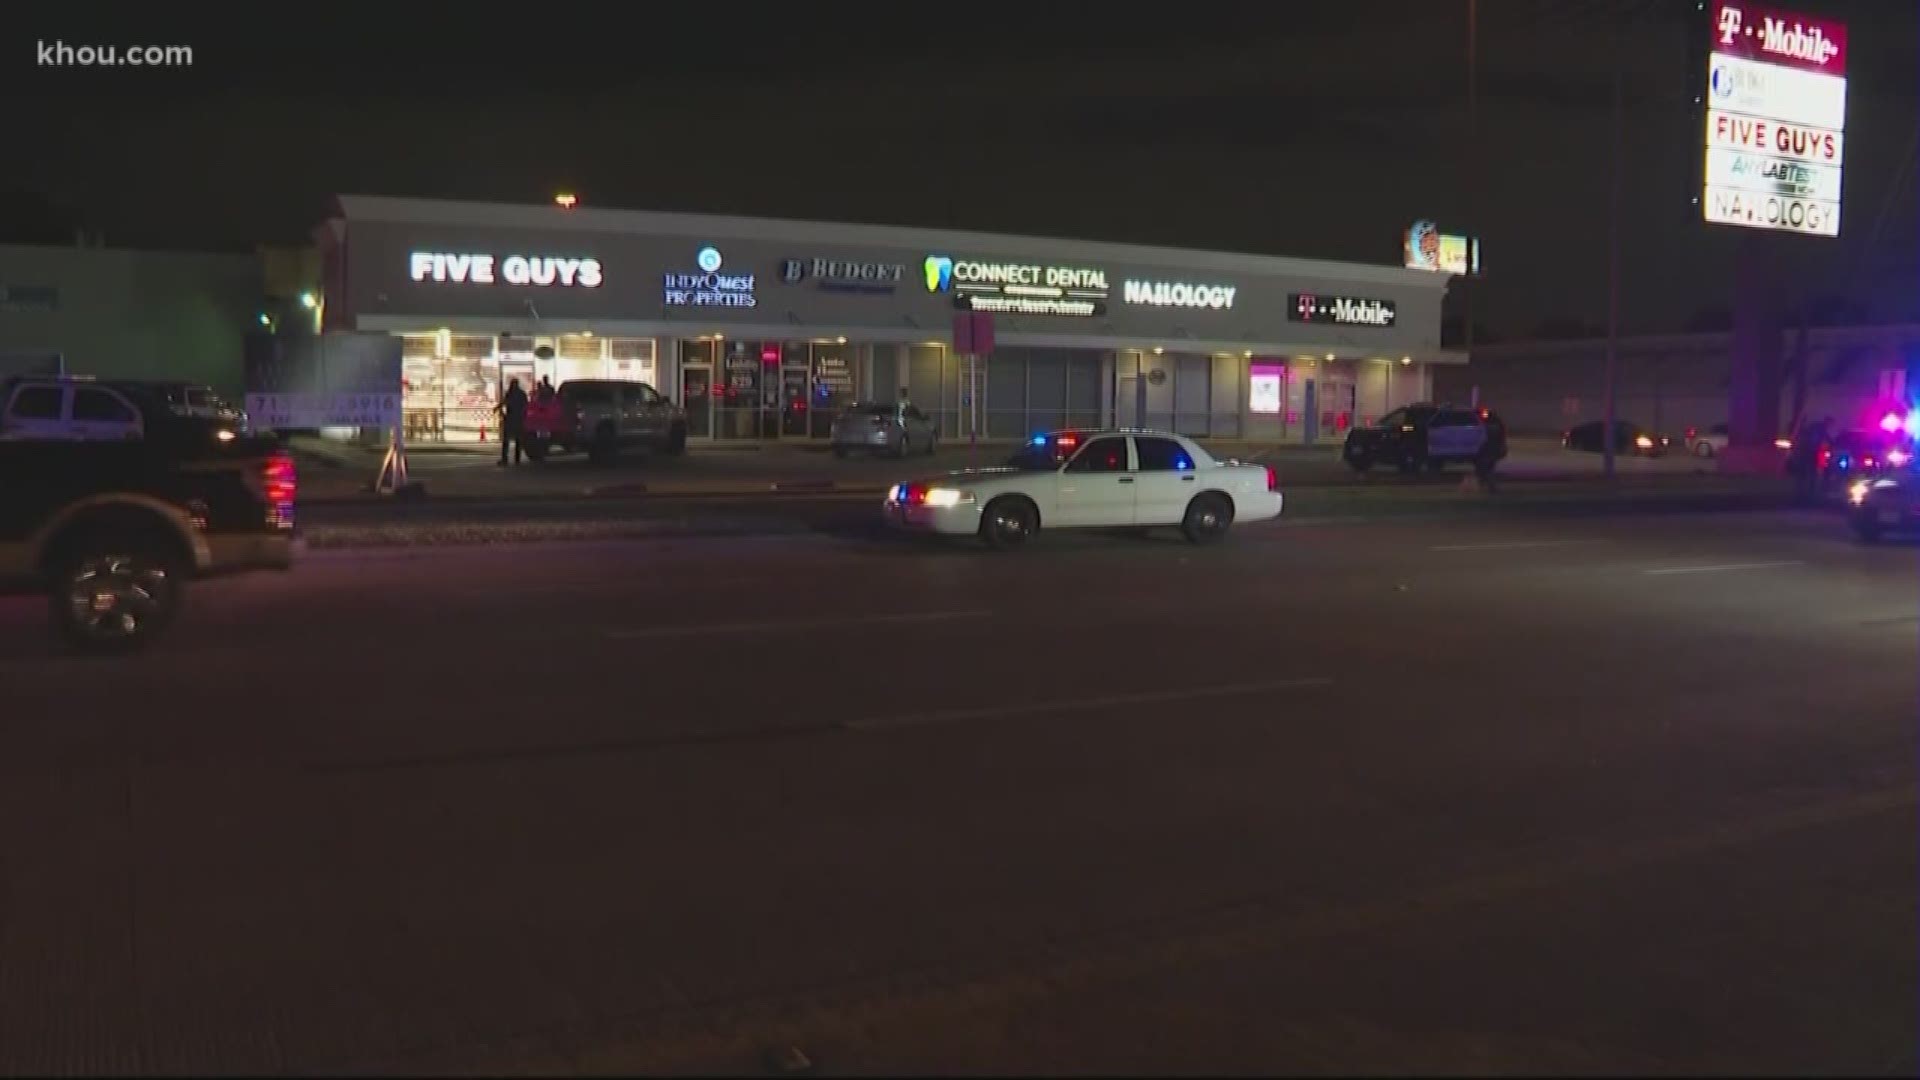 Houston police are looking for a robbery suspect who shot Harris County Precinct 5 deputy in the arm while he was working security at a restaurant.